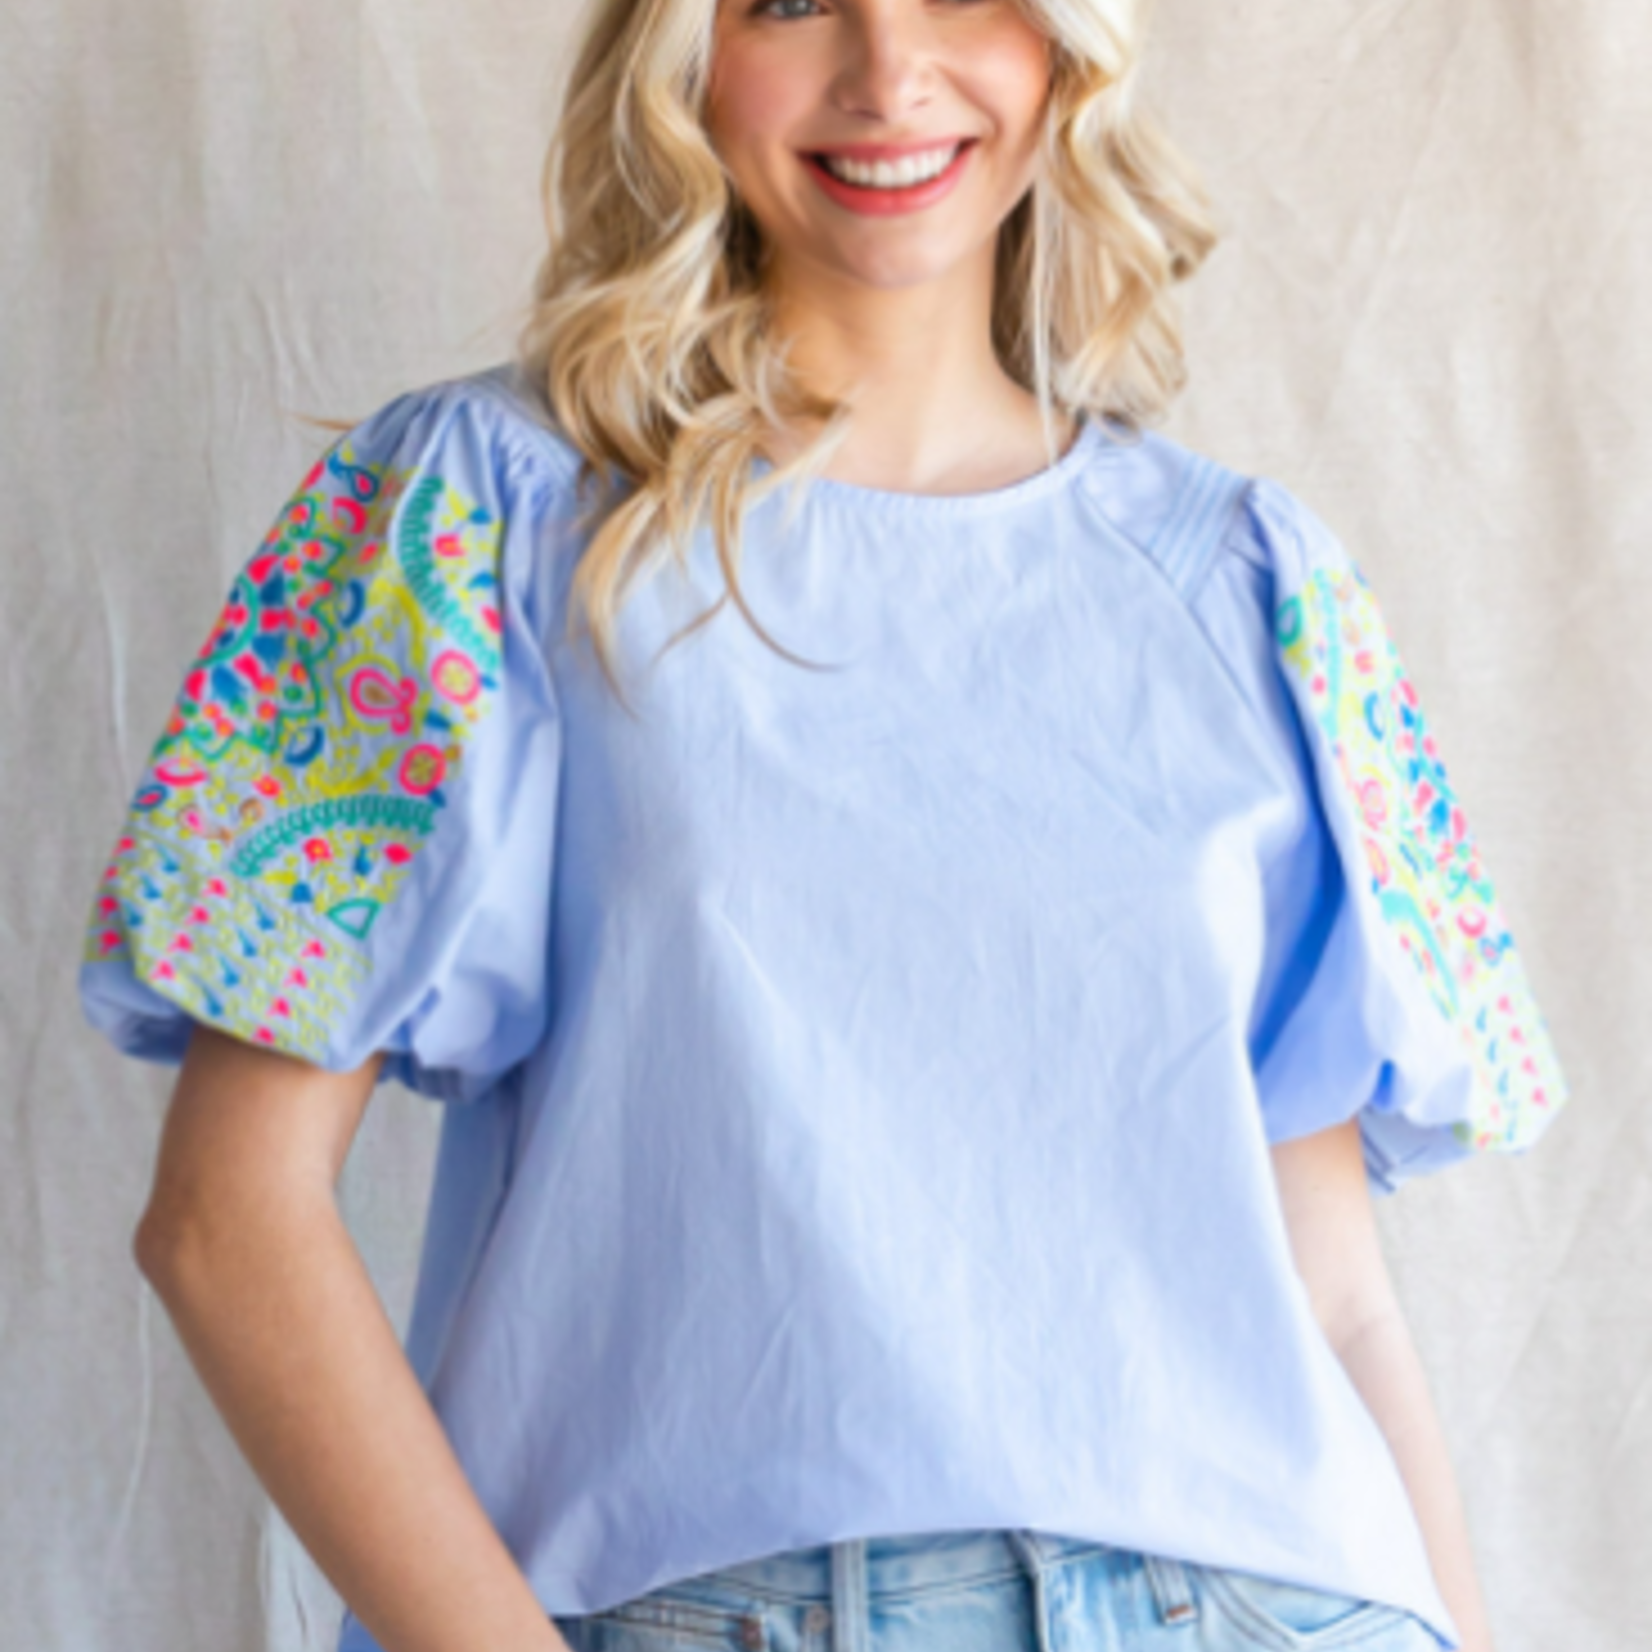 Jodifl Square Top w/ Bright Floral Detail on Puff Sleeve